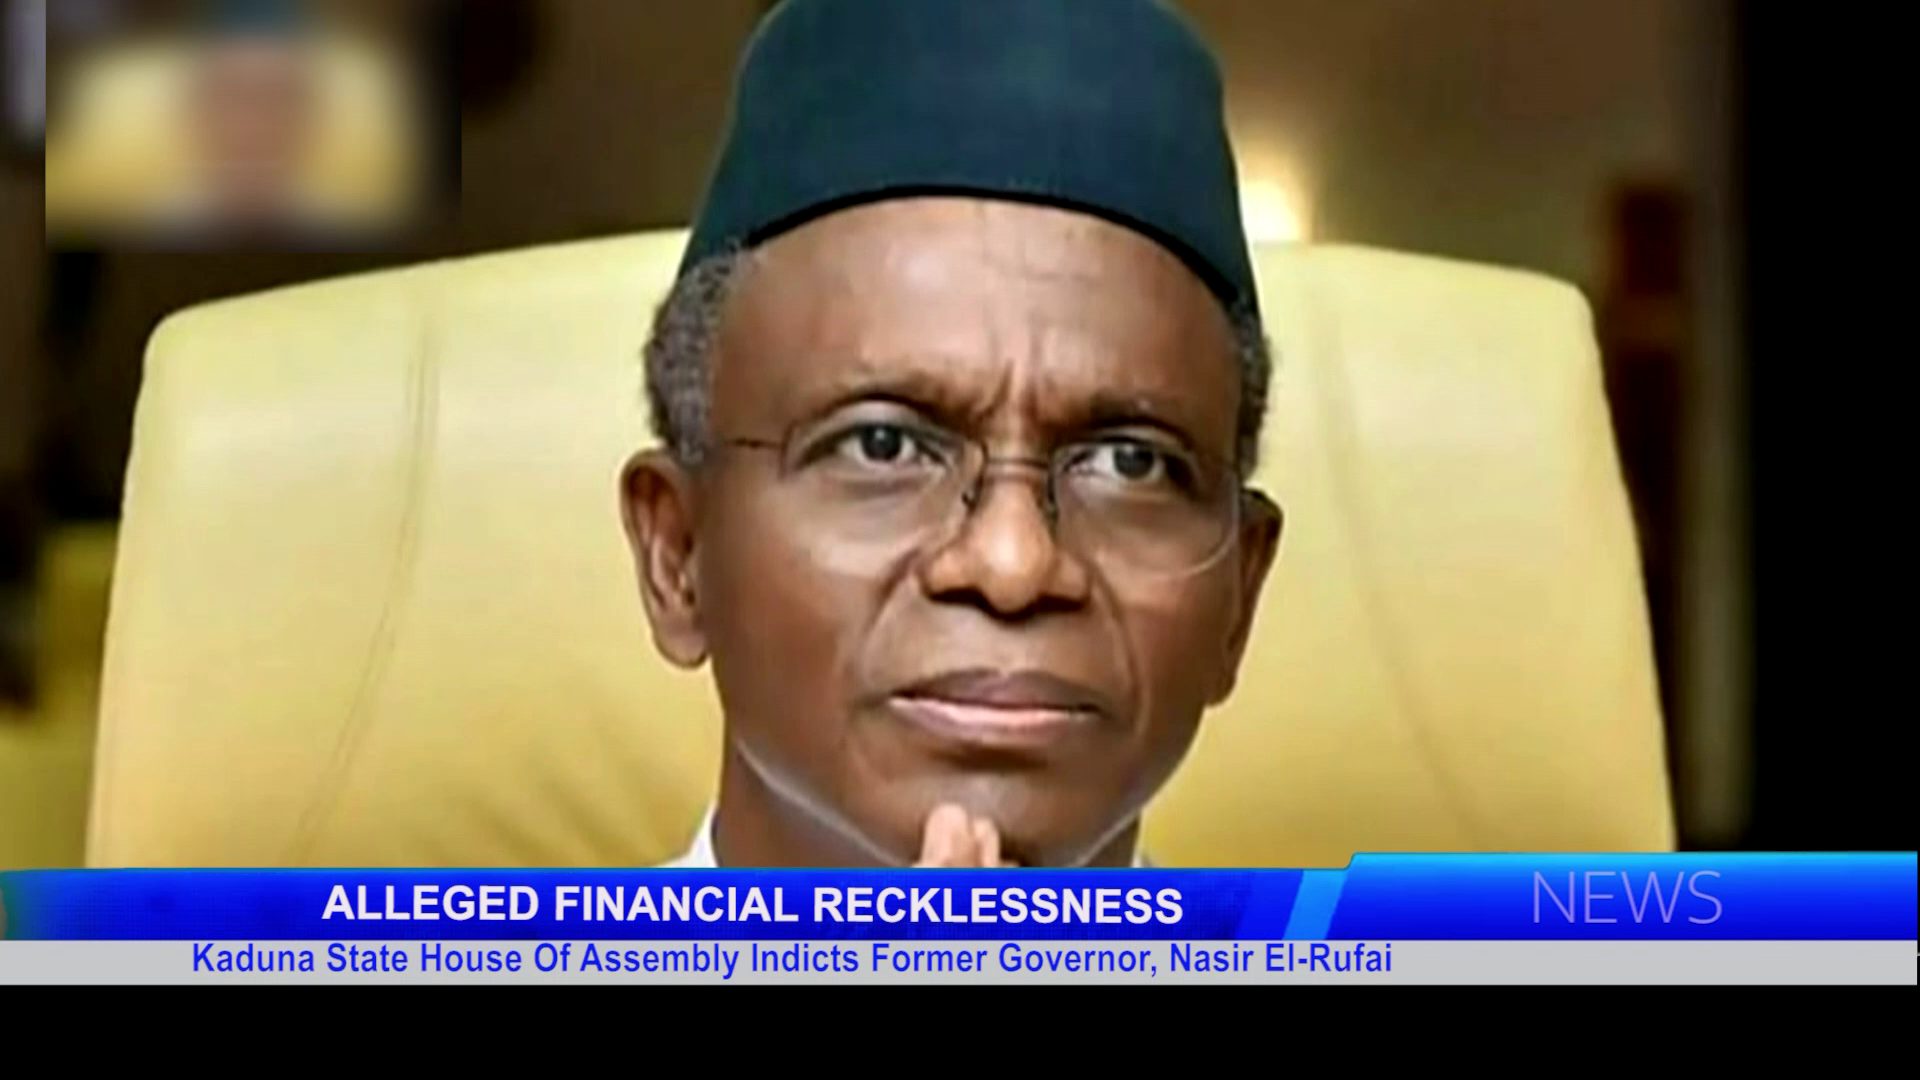 Kaduna State House Of Assembly Indicts Former Governor, Nasir El-Rufai